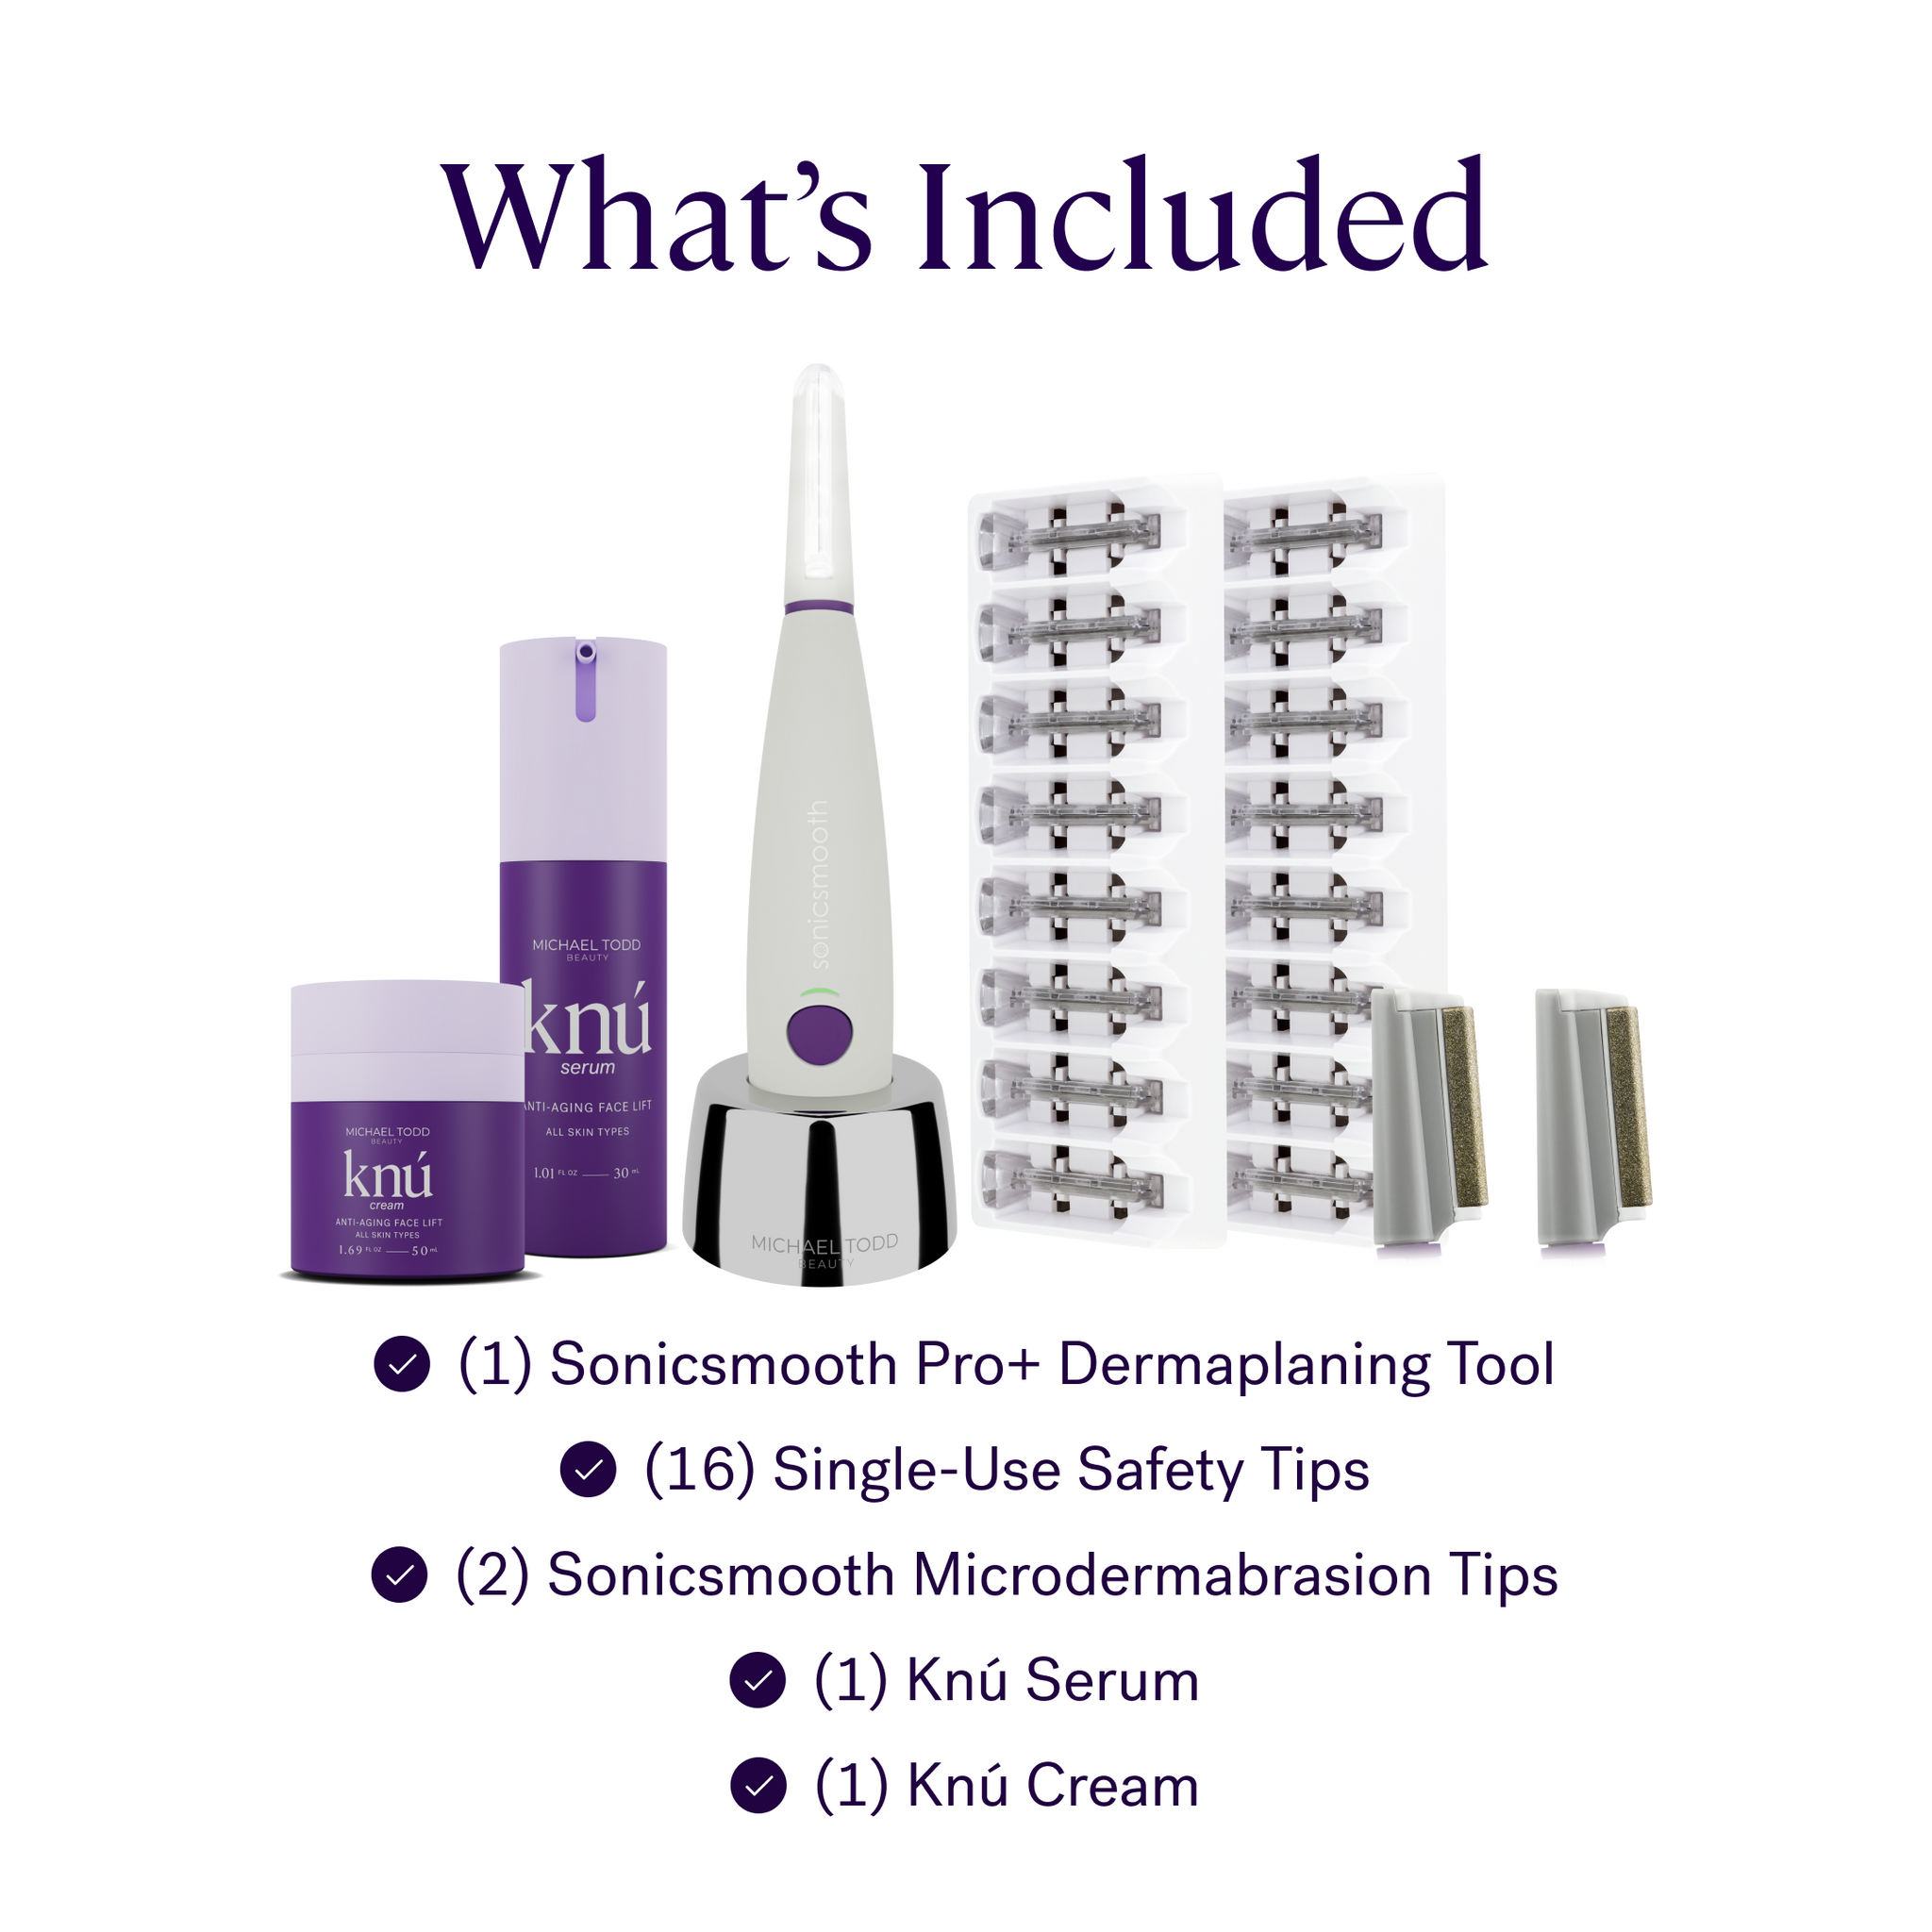 Image displays a skincare set including a Michael Todd Beauty 4 in 1 Dermaplaning & Post Treatment System, safety tips, microdermabrasion tips, serum, and cream.